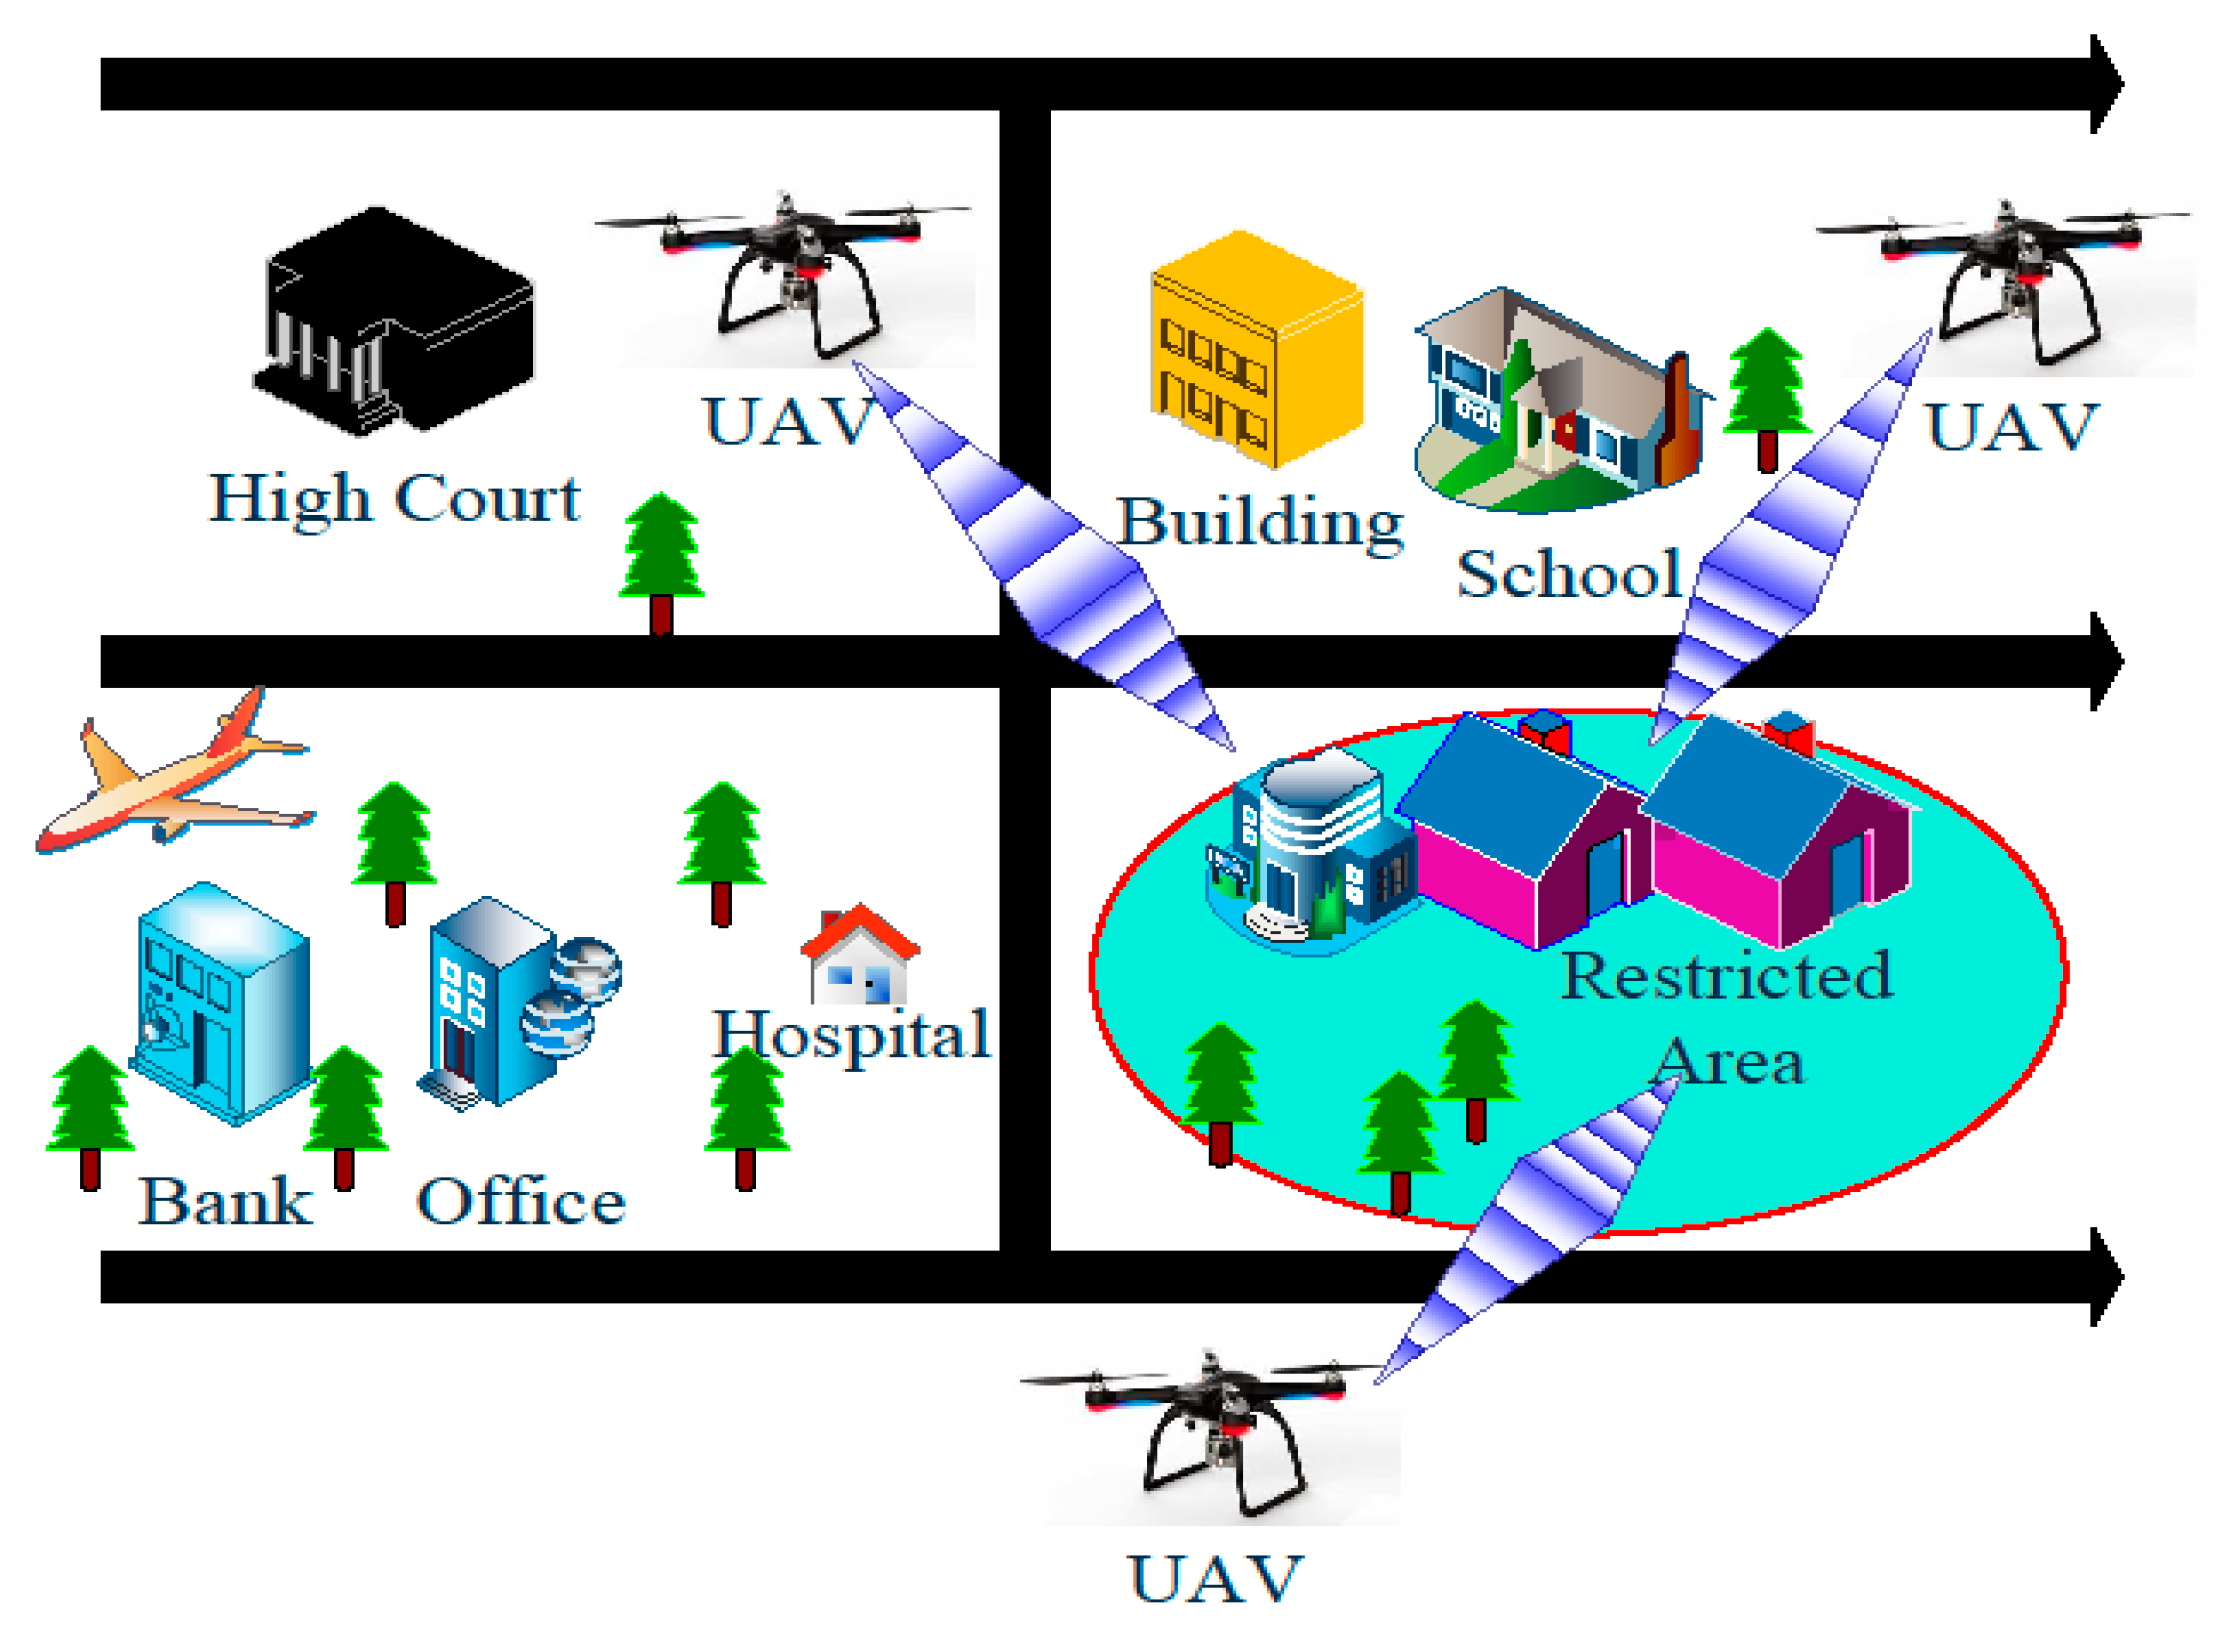 Sensors Free Full Text Malicious Uav Detection Using Integrated Audio And Visual Features For Public Safety Applications Html